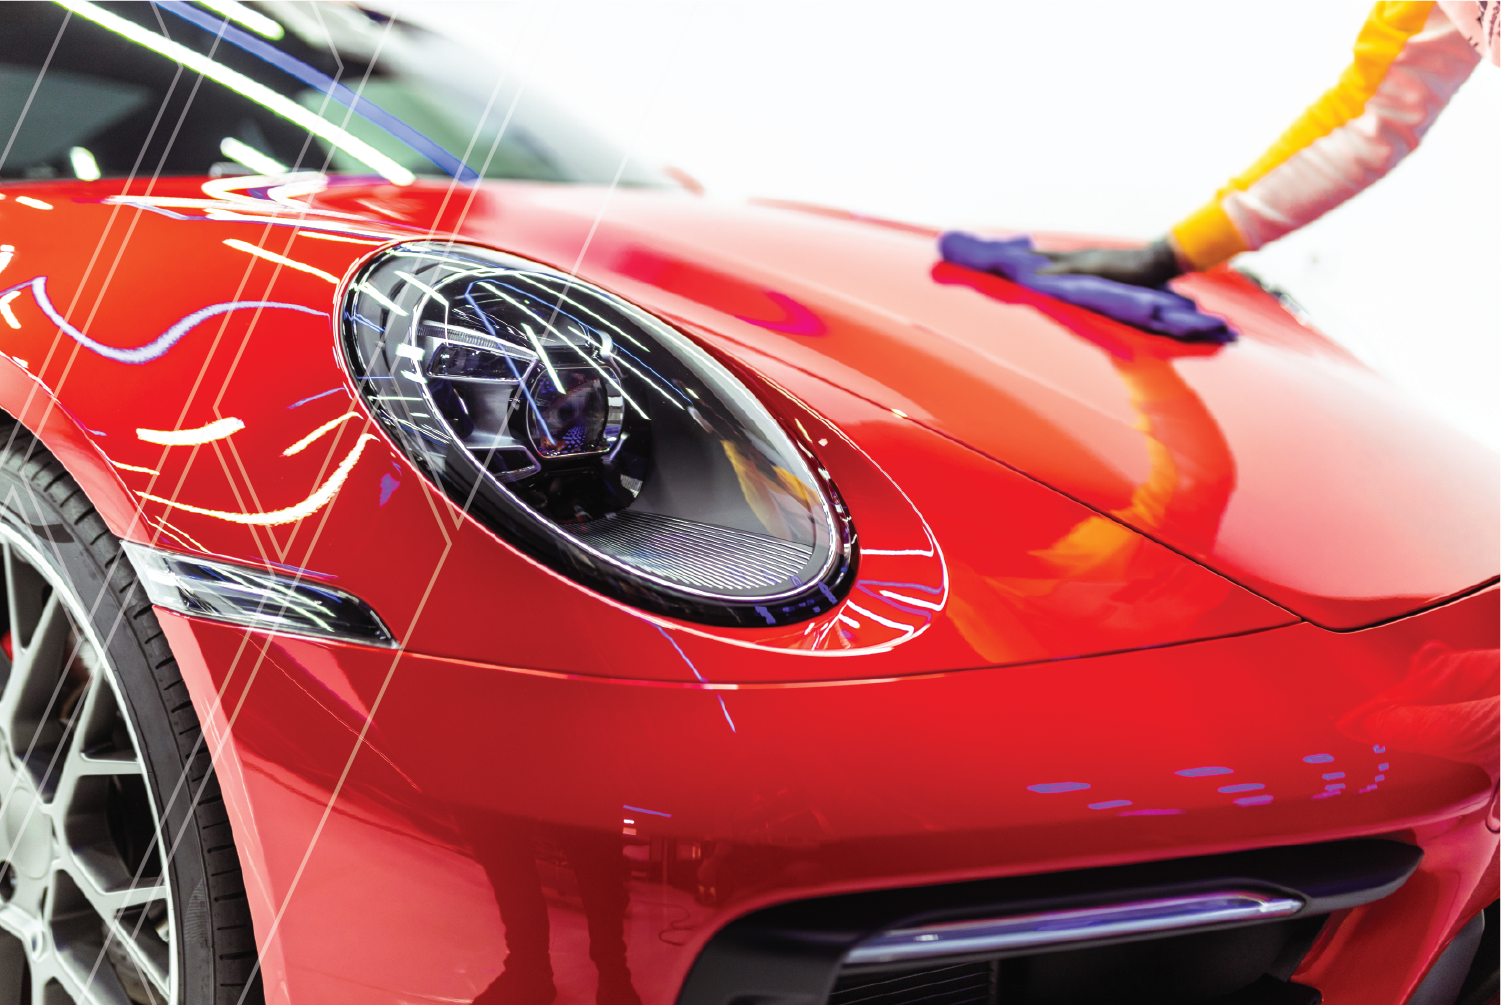 Get to Know the Best Auto Detailing Secrets and Products Recommended by Experts